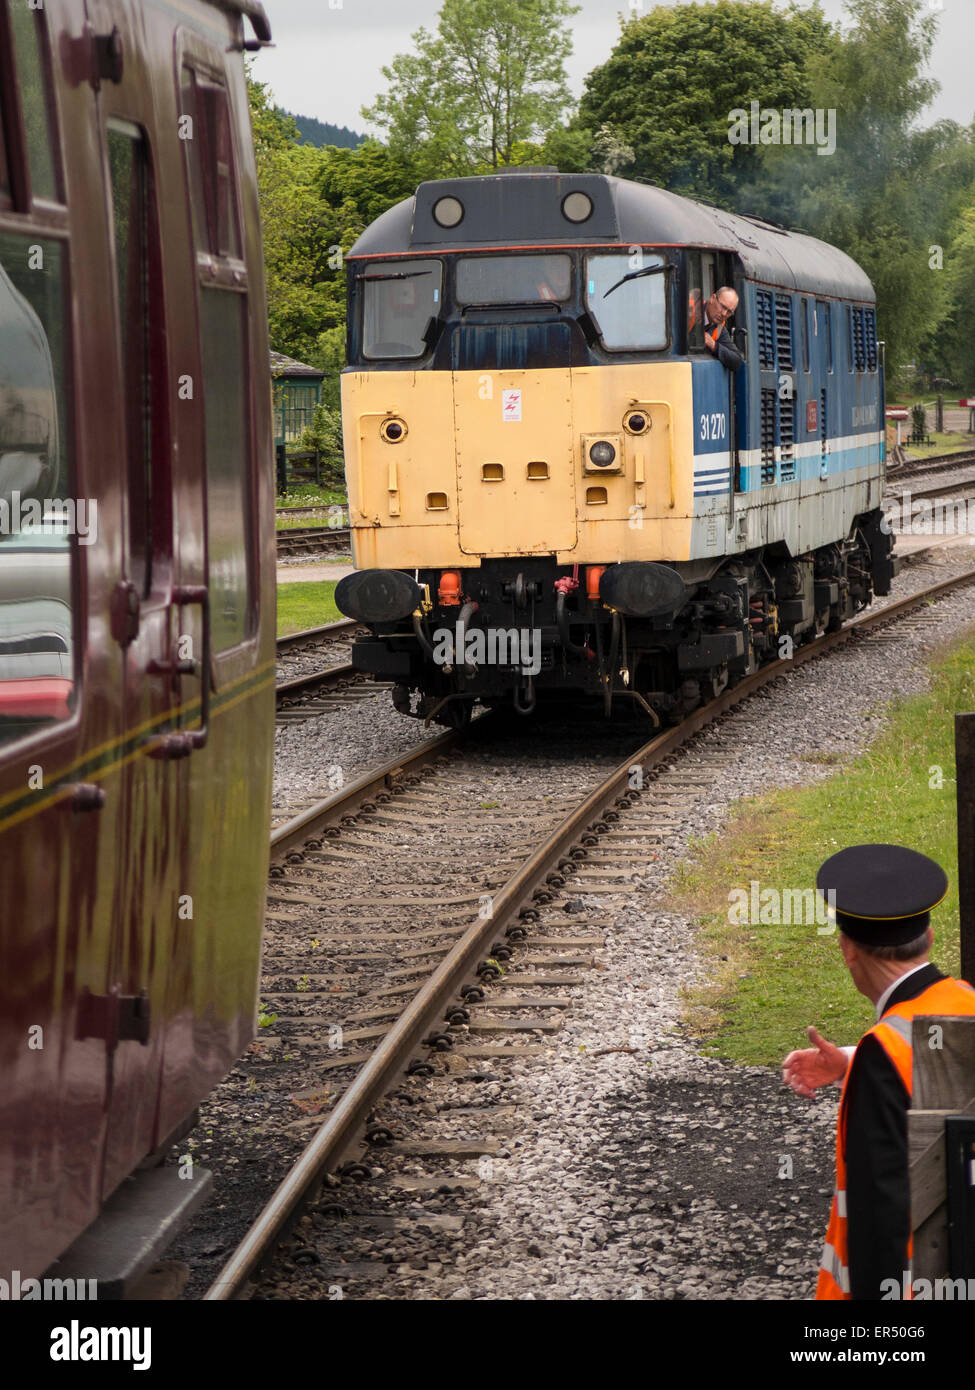 Rowsley,near Matlock,Derbyshire,Britain. May 27th 2015.The vintage diesel locomotive Athena is prepared for service at Peak Rail's heritage railway station platform. Stock Photo